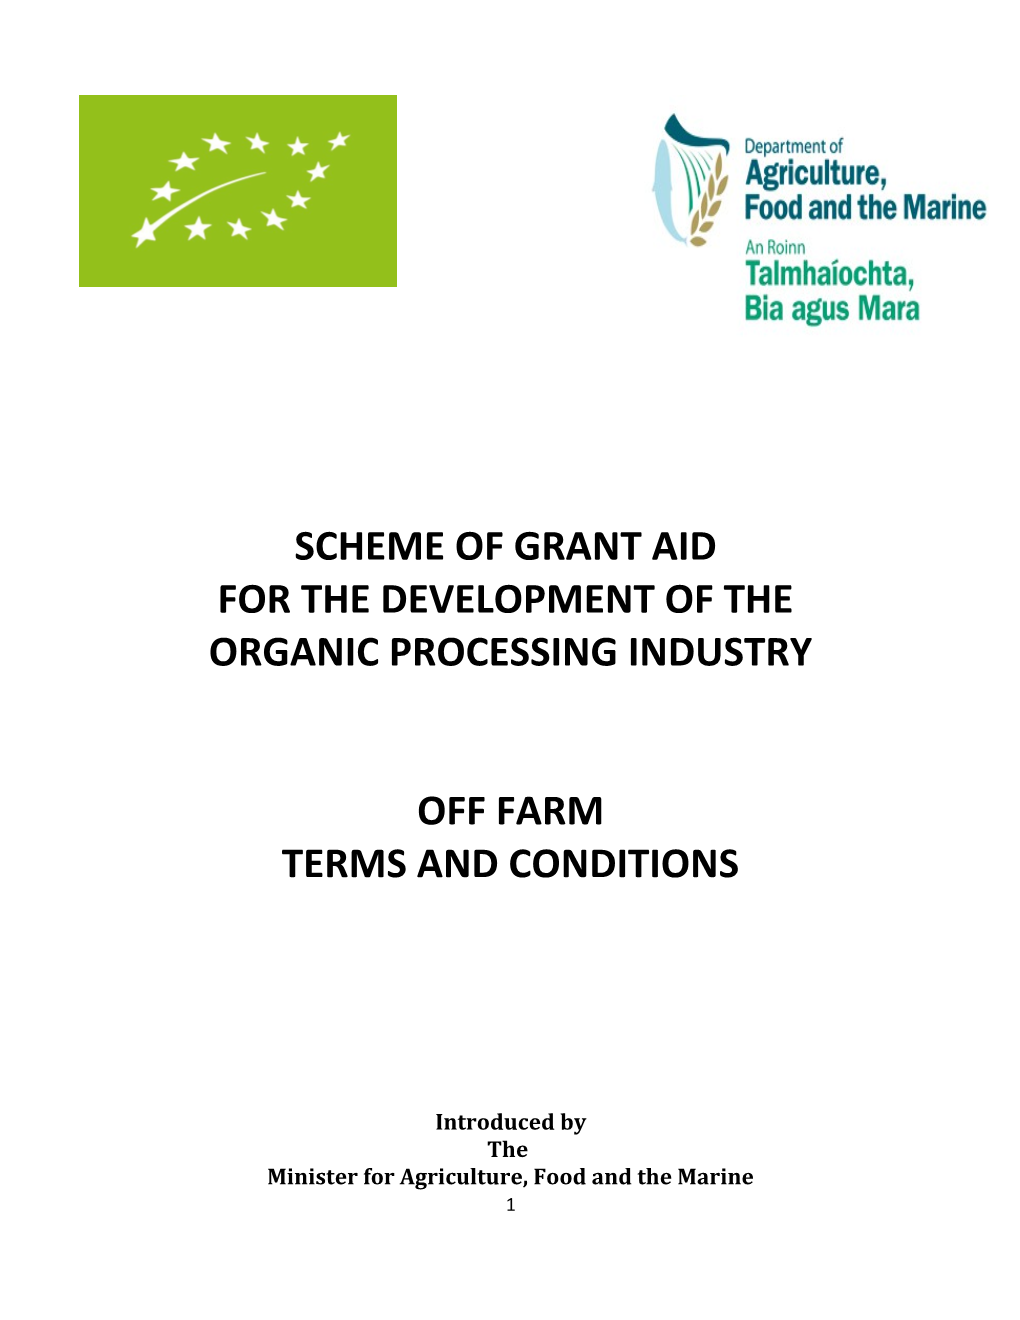 National Scheme of Investment Aid for the Control of Farm Polution